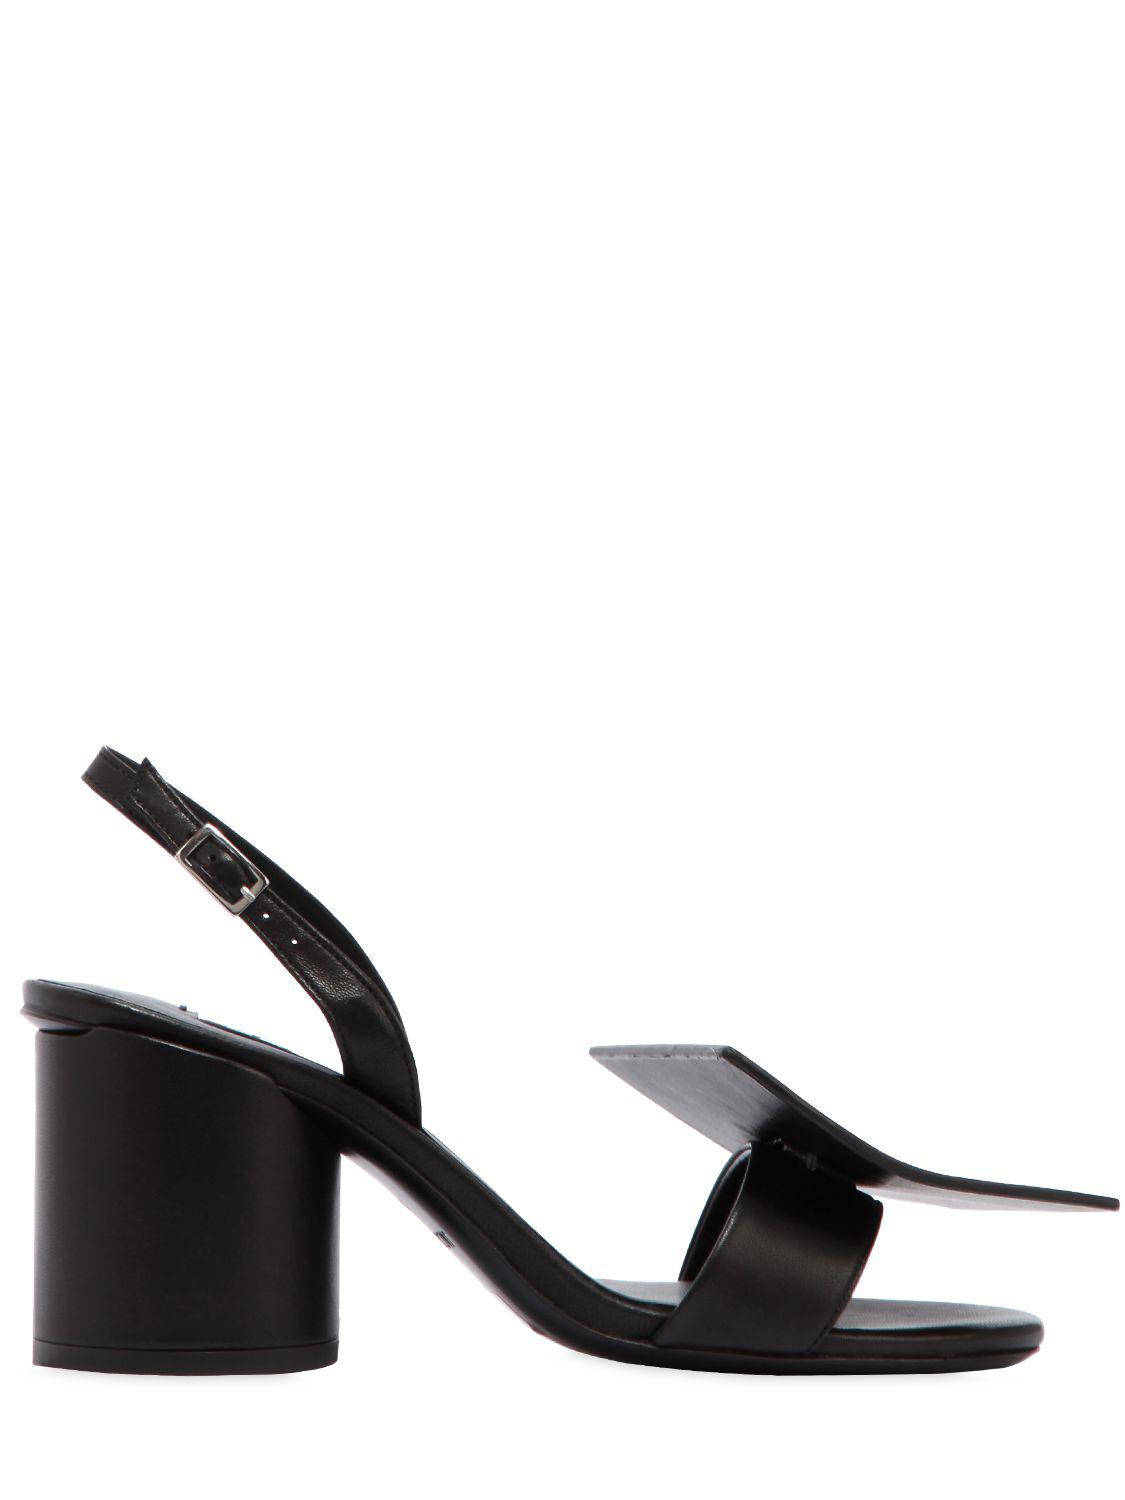 Jacquemus 90mm Square Circle Leather Sandals in Black - Lyst